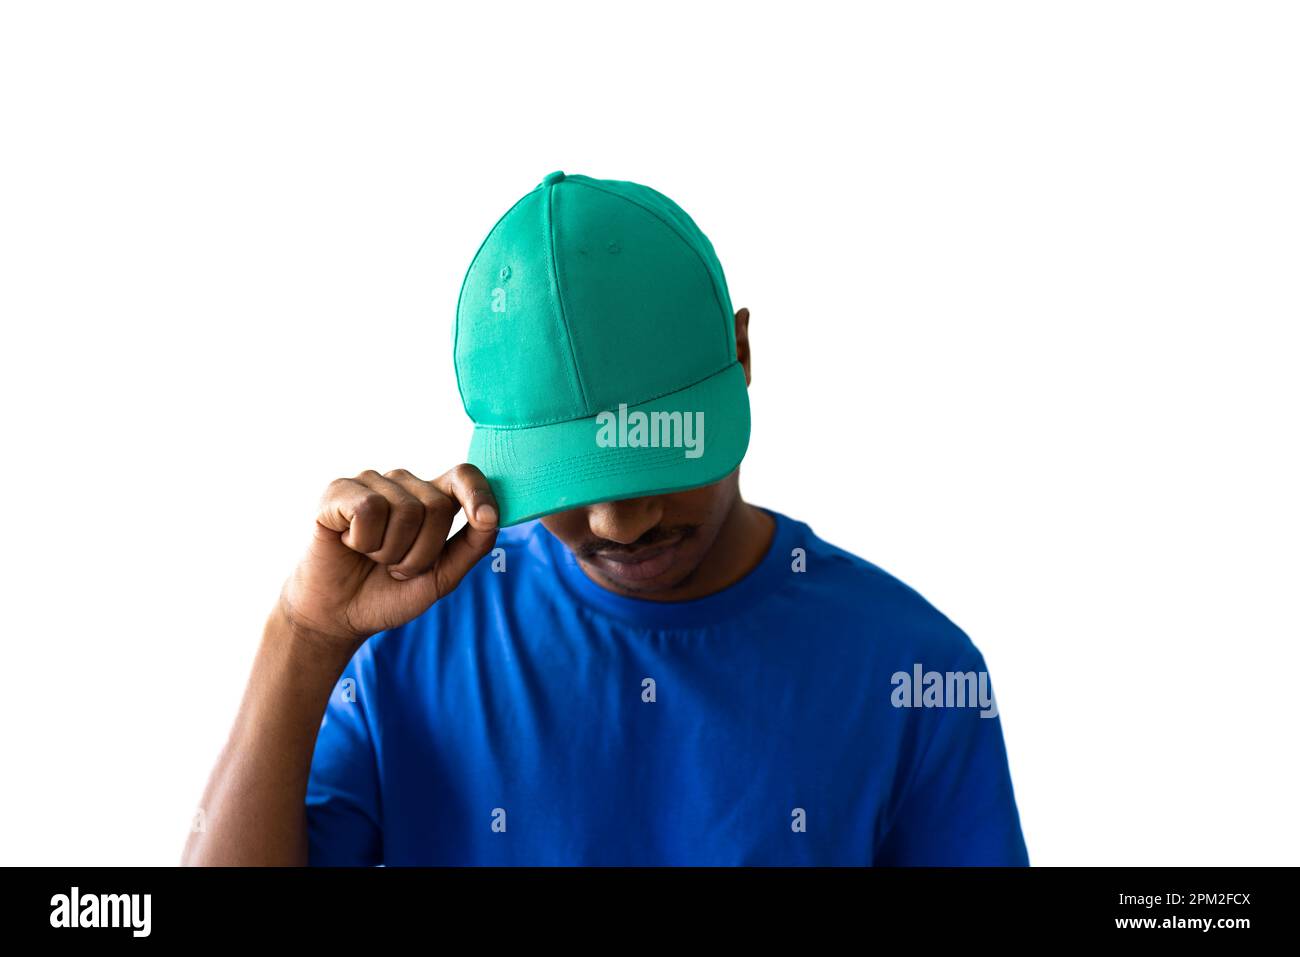 African american man wearing blue t-shirt and green cap with copy space on white background Stock Photo